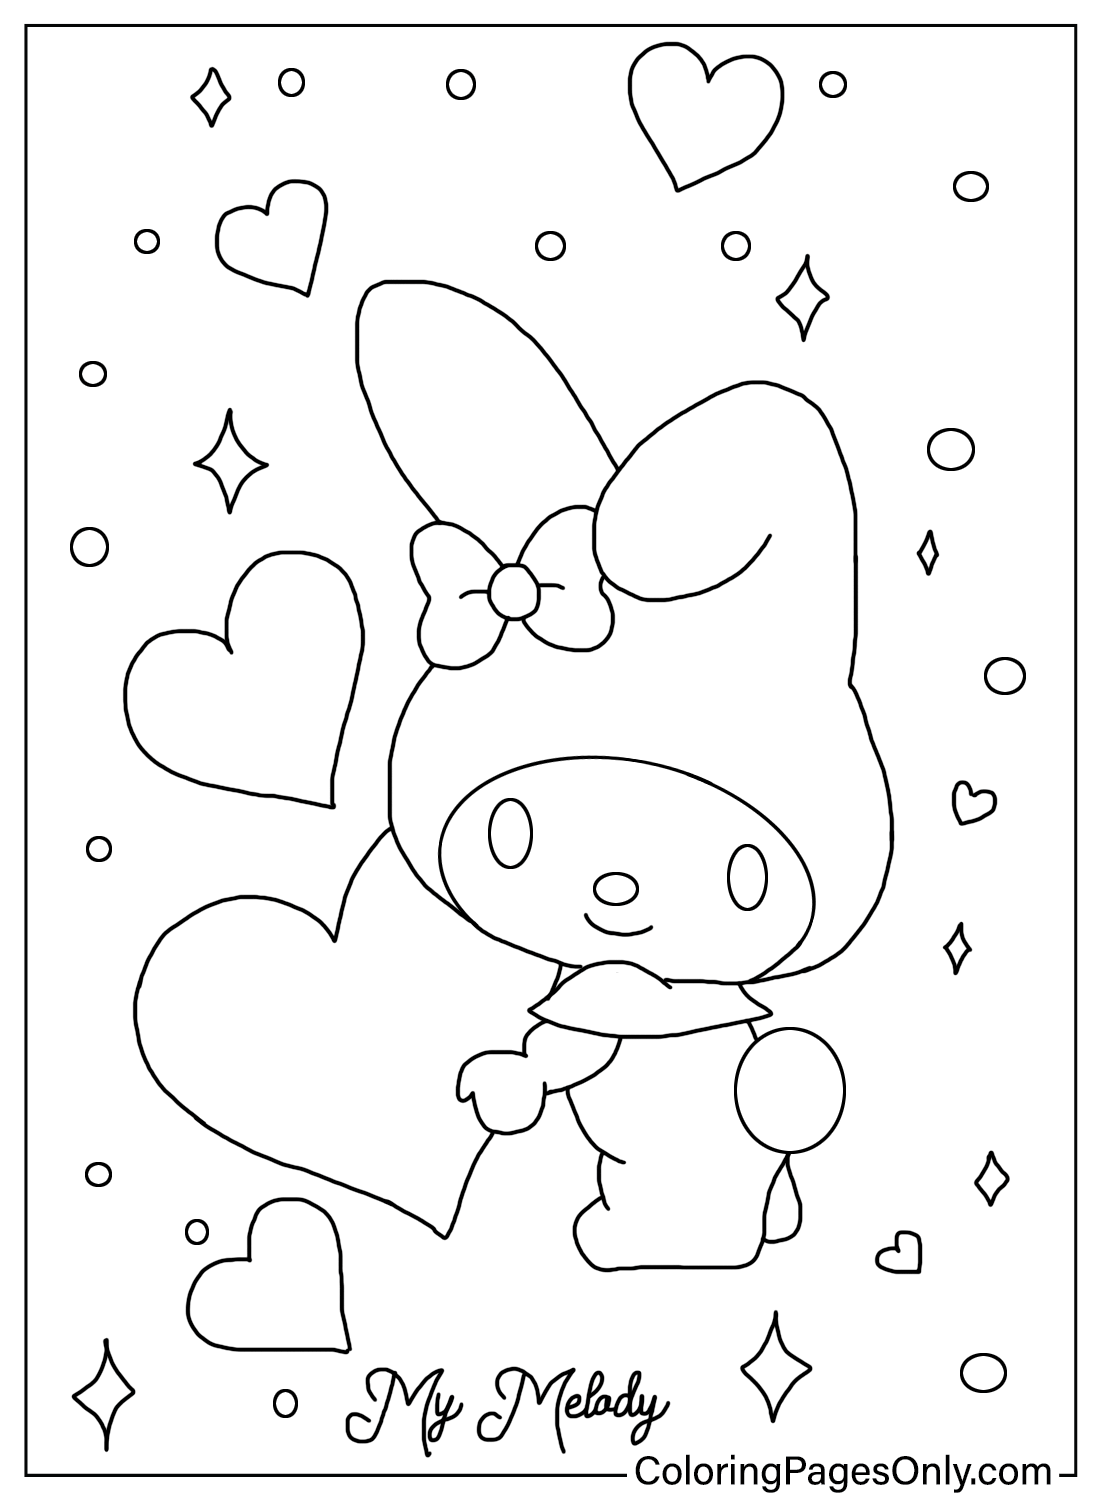 Printable My Melody Coloring Pages - Free Printable Coloring Pages